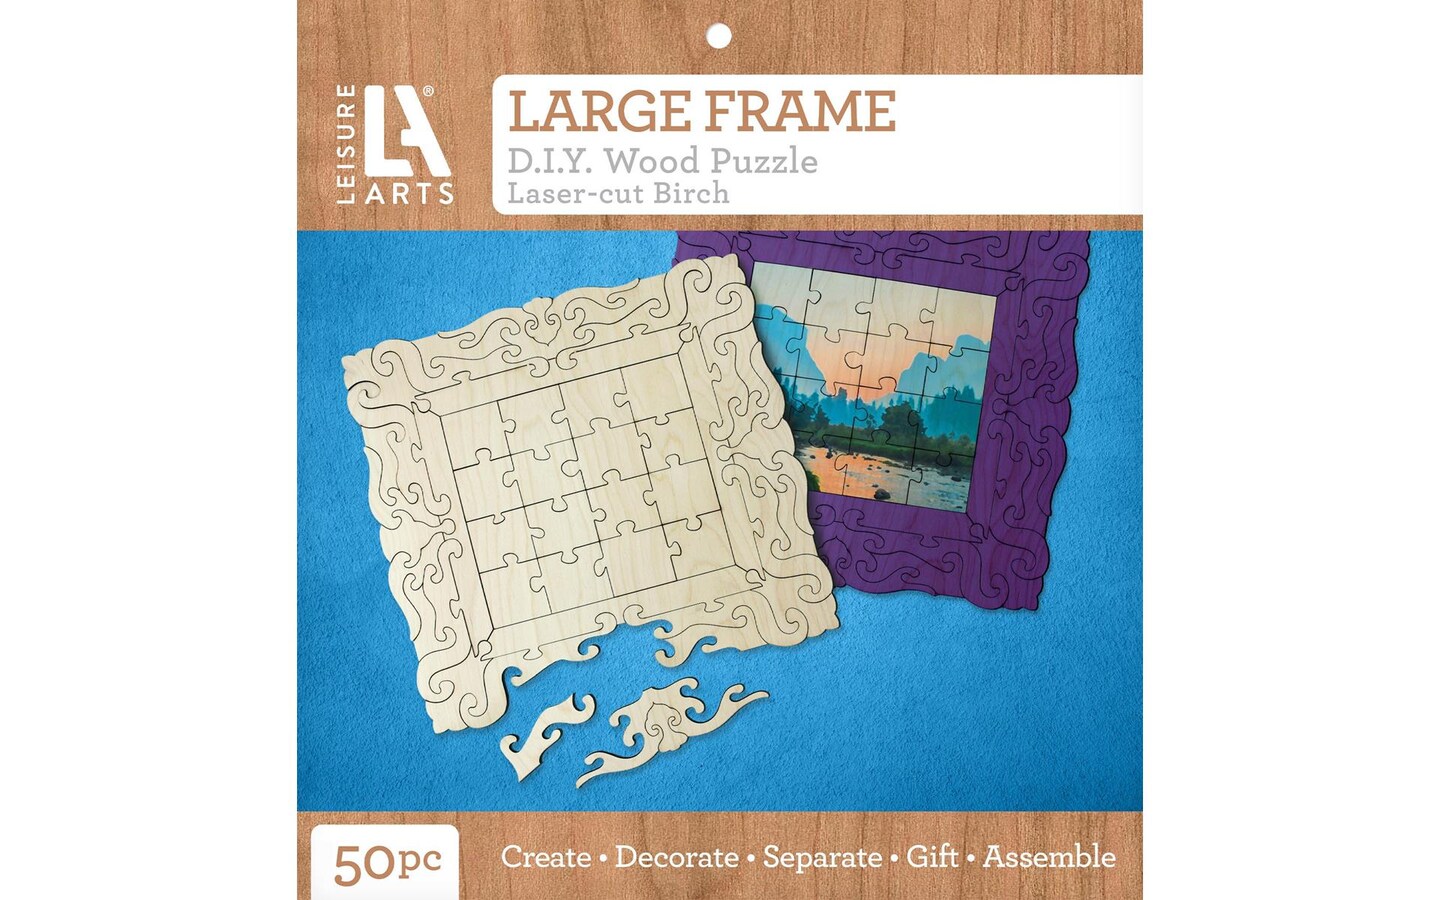 Leisure Arts Wood Puzzle Large Frame 50 pieces 12 x 11.5 Blank Puzzles,  Make Your Own puzzle, Blank Puzzle Pieces Blank Wooden Puzzles DIY Jigsaw  Puzzles, blank puzzles to draw on